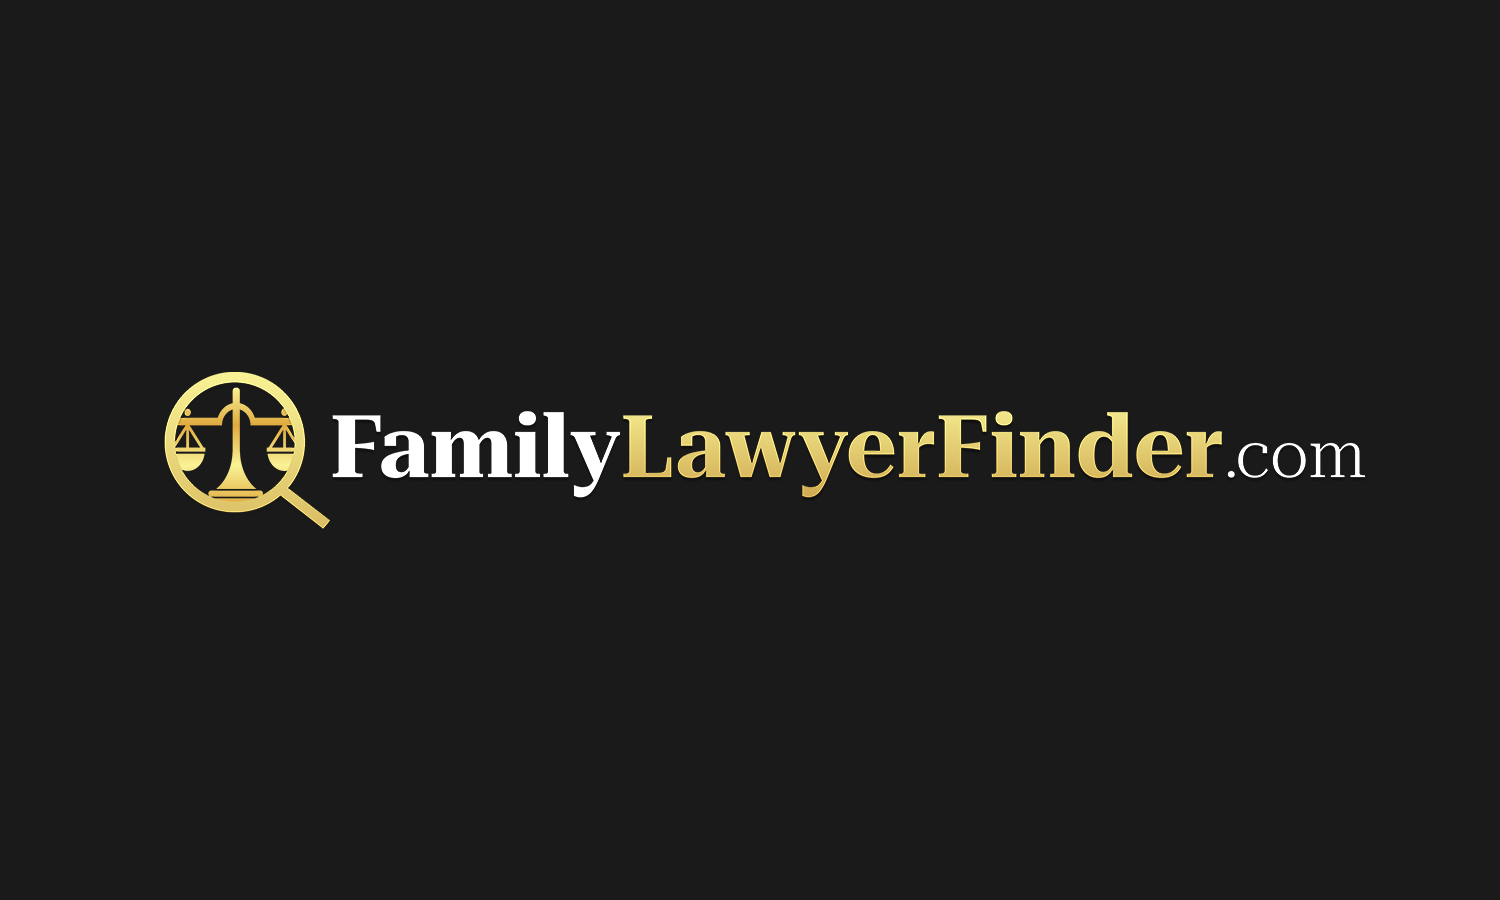 The Best 12 Family Lawyers In San Francisco (Updated 2023) | ⚖️ Top Rated Family Solicitors by Family Lawyer Finder San Francisco ™